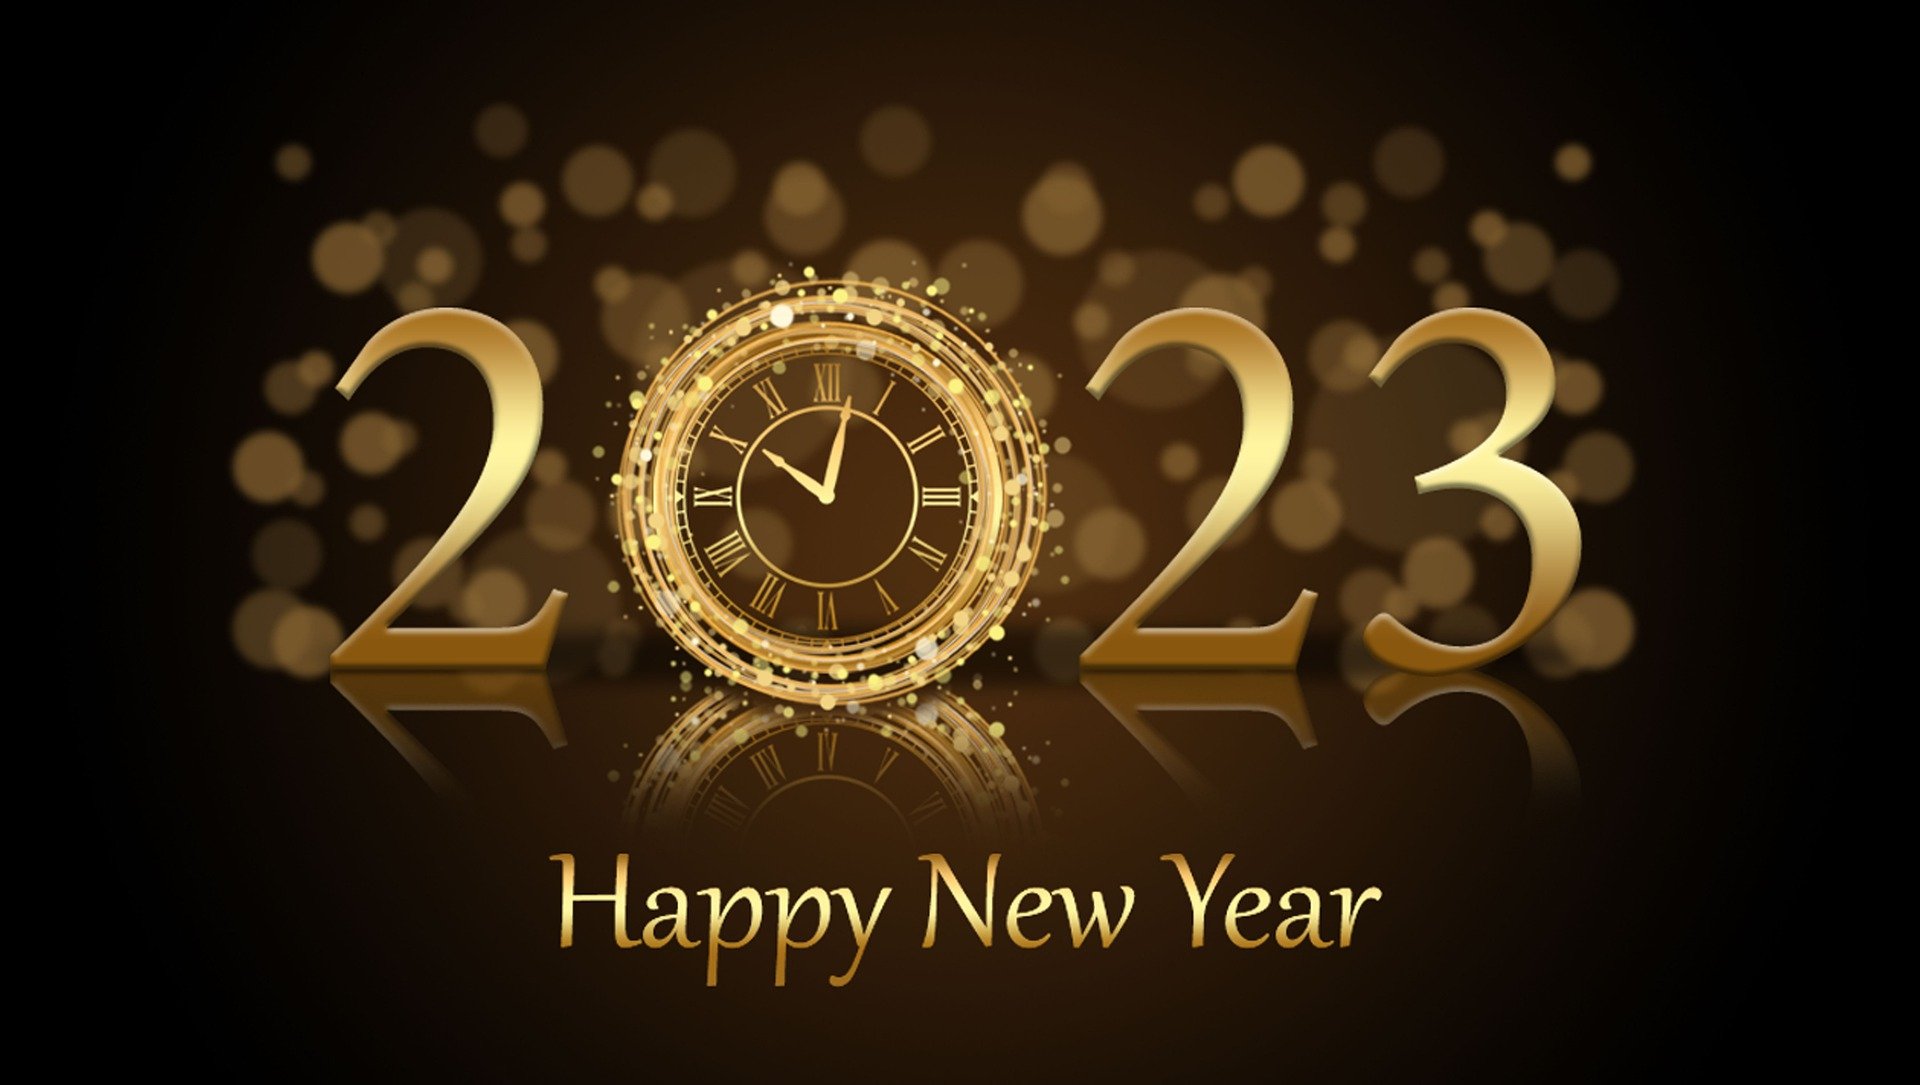 Image for Wishing our Chamber Family a Happy New Year!